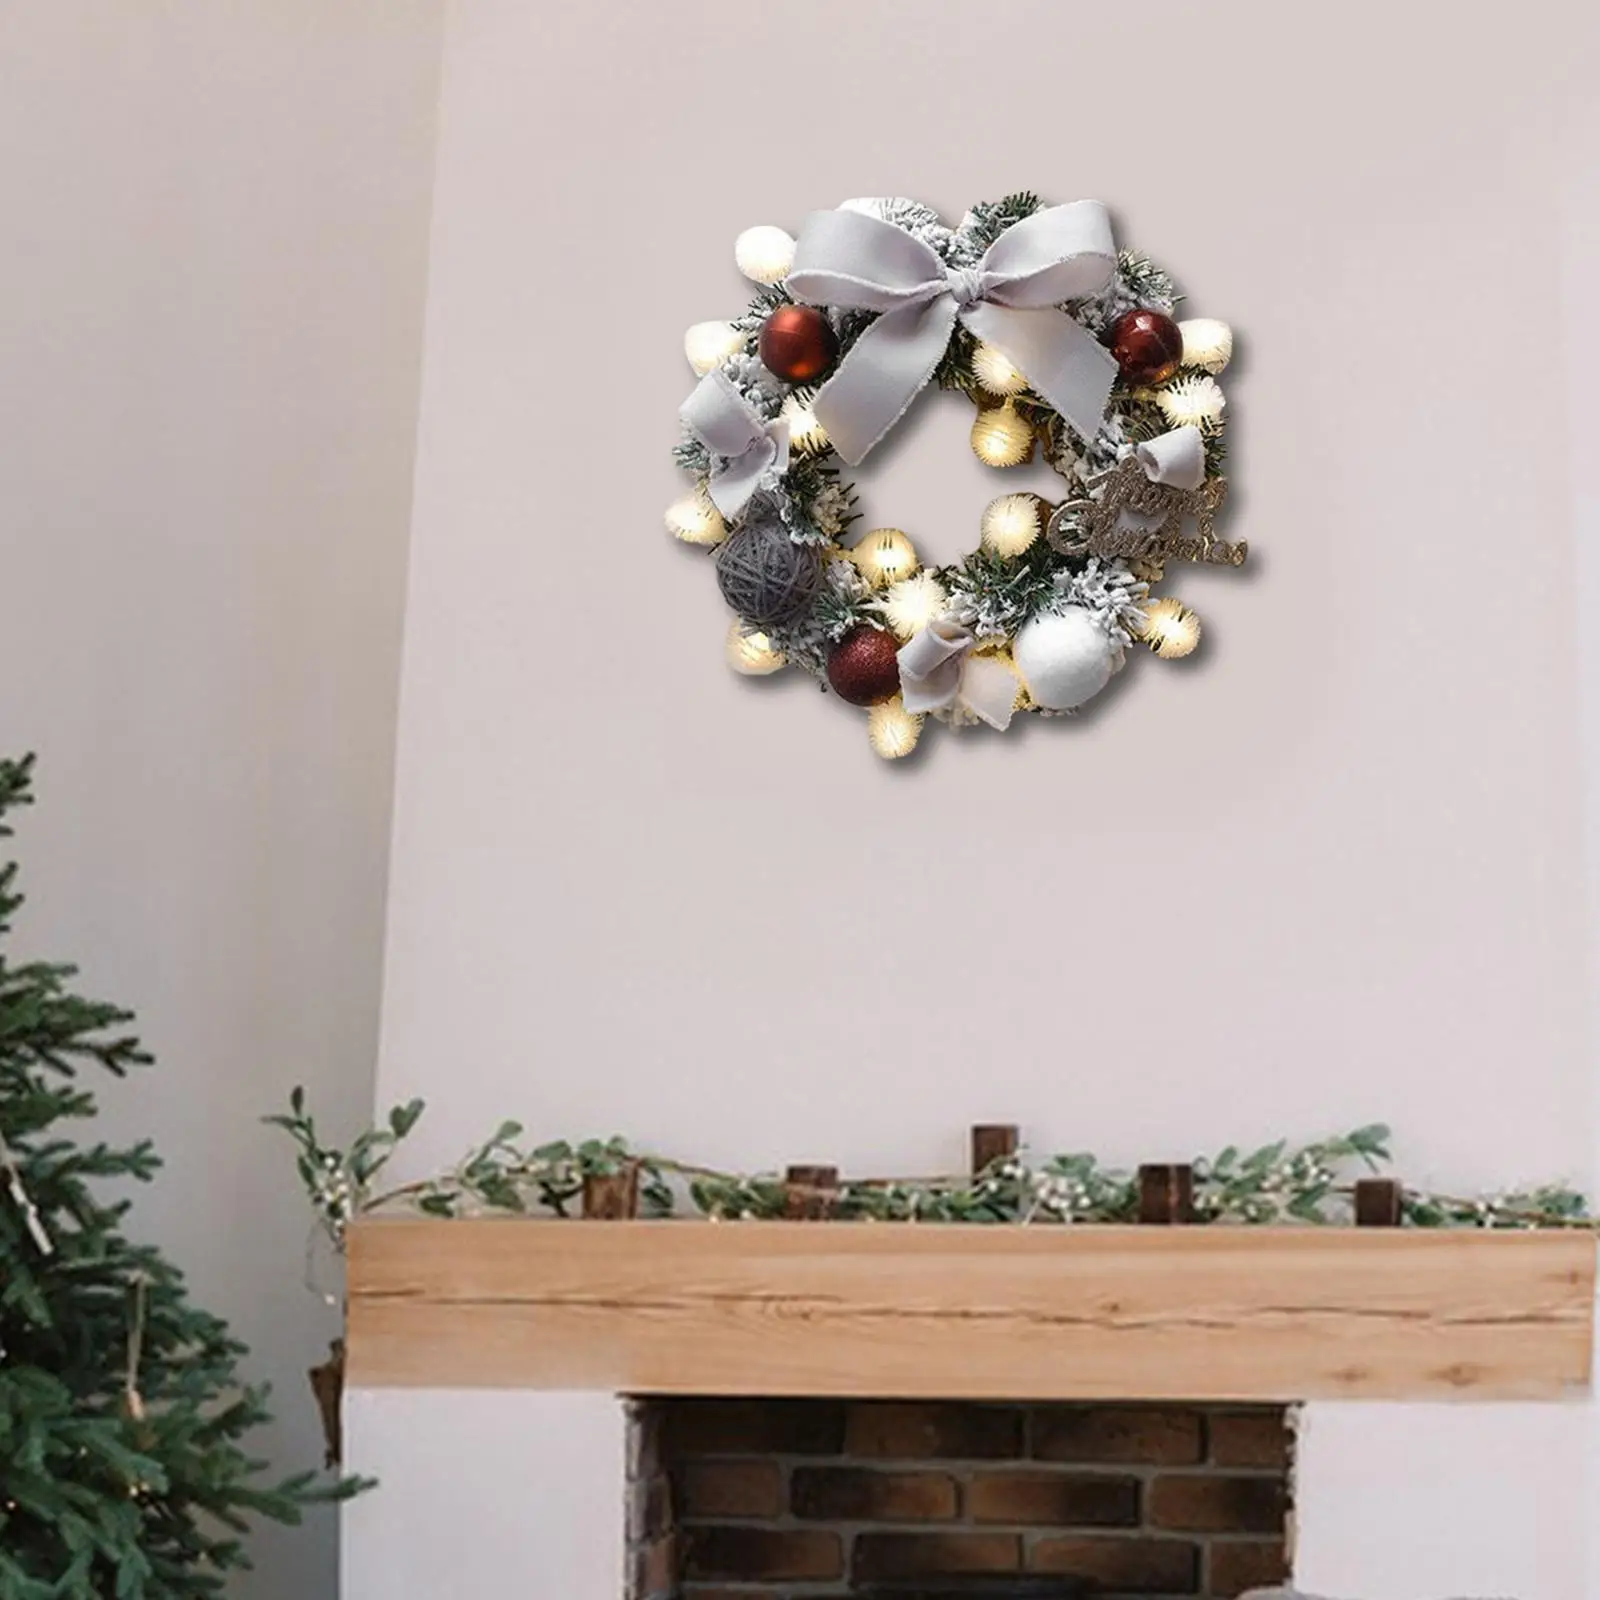 Artificial Christmas Wreath with String Light Decor Indoor Outdoor Holiday Garland for Garden Balcony Hotel Living Room Festival